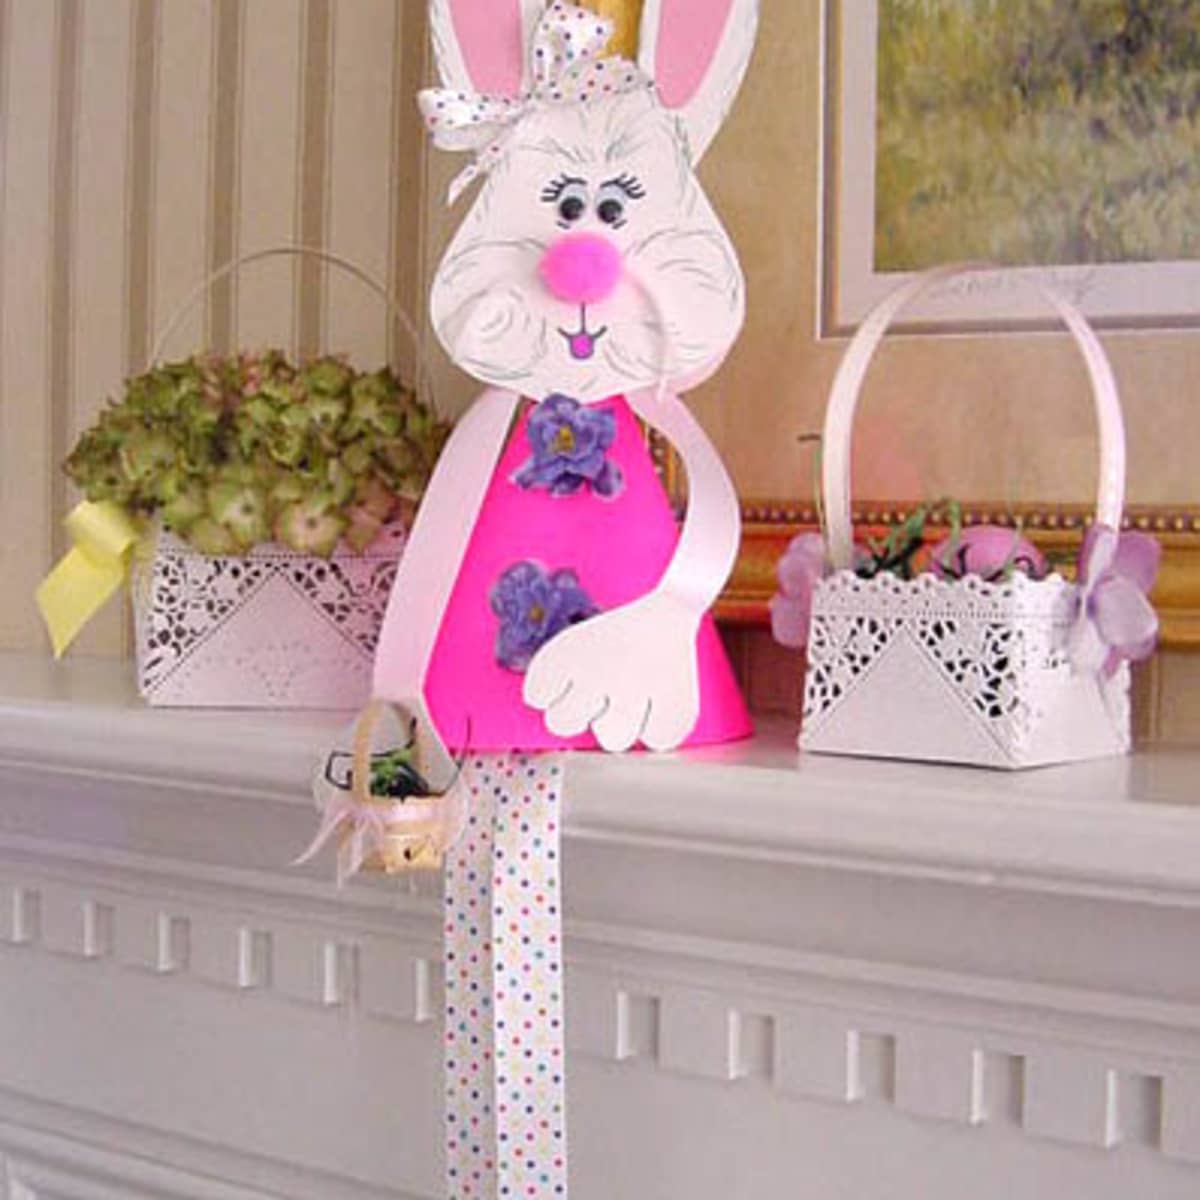 21 Bunny Crafts for Kids to Make – Easter Fun - A Crafty Life